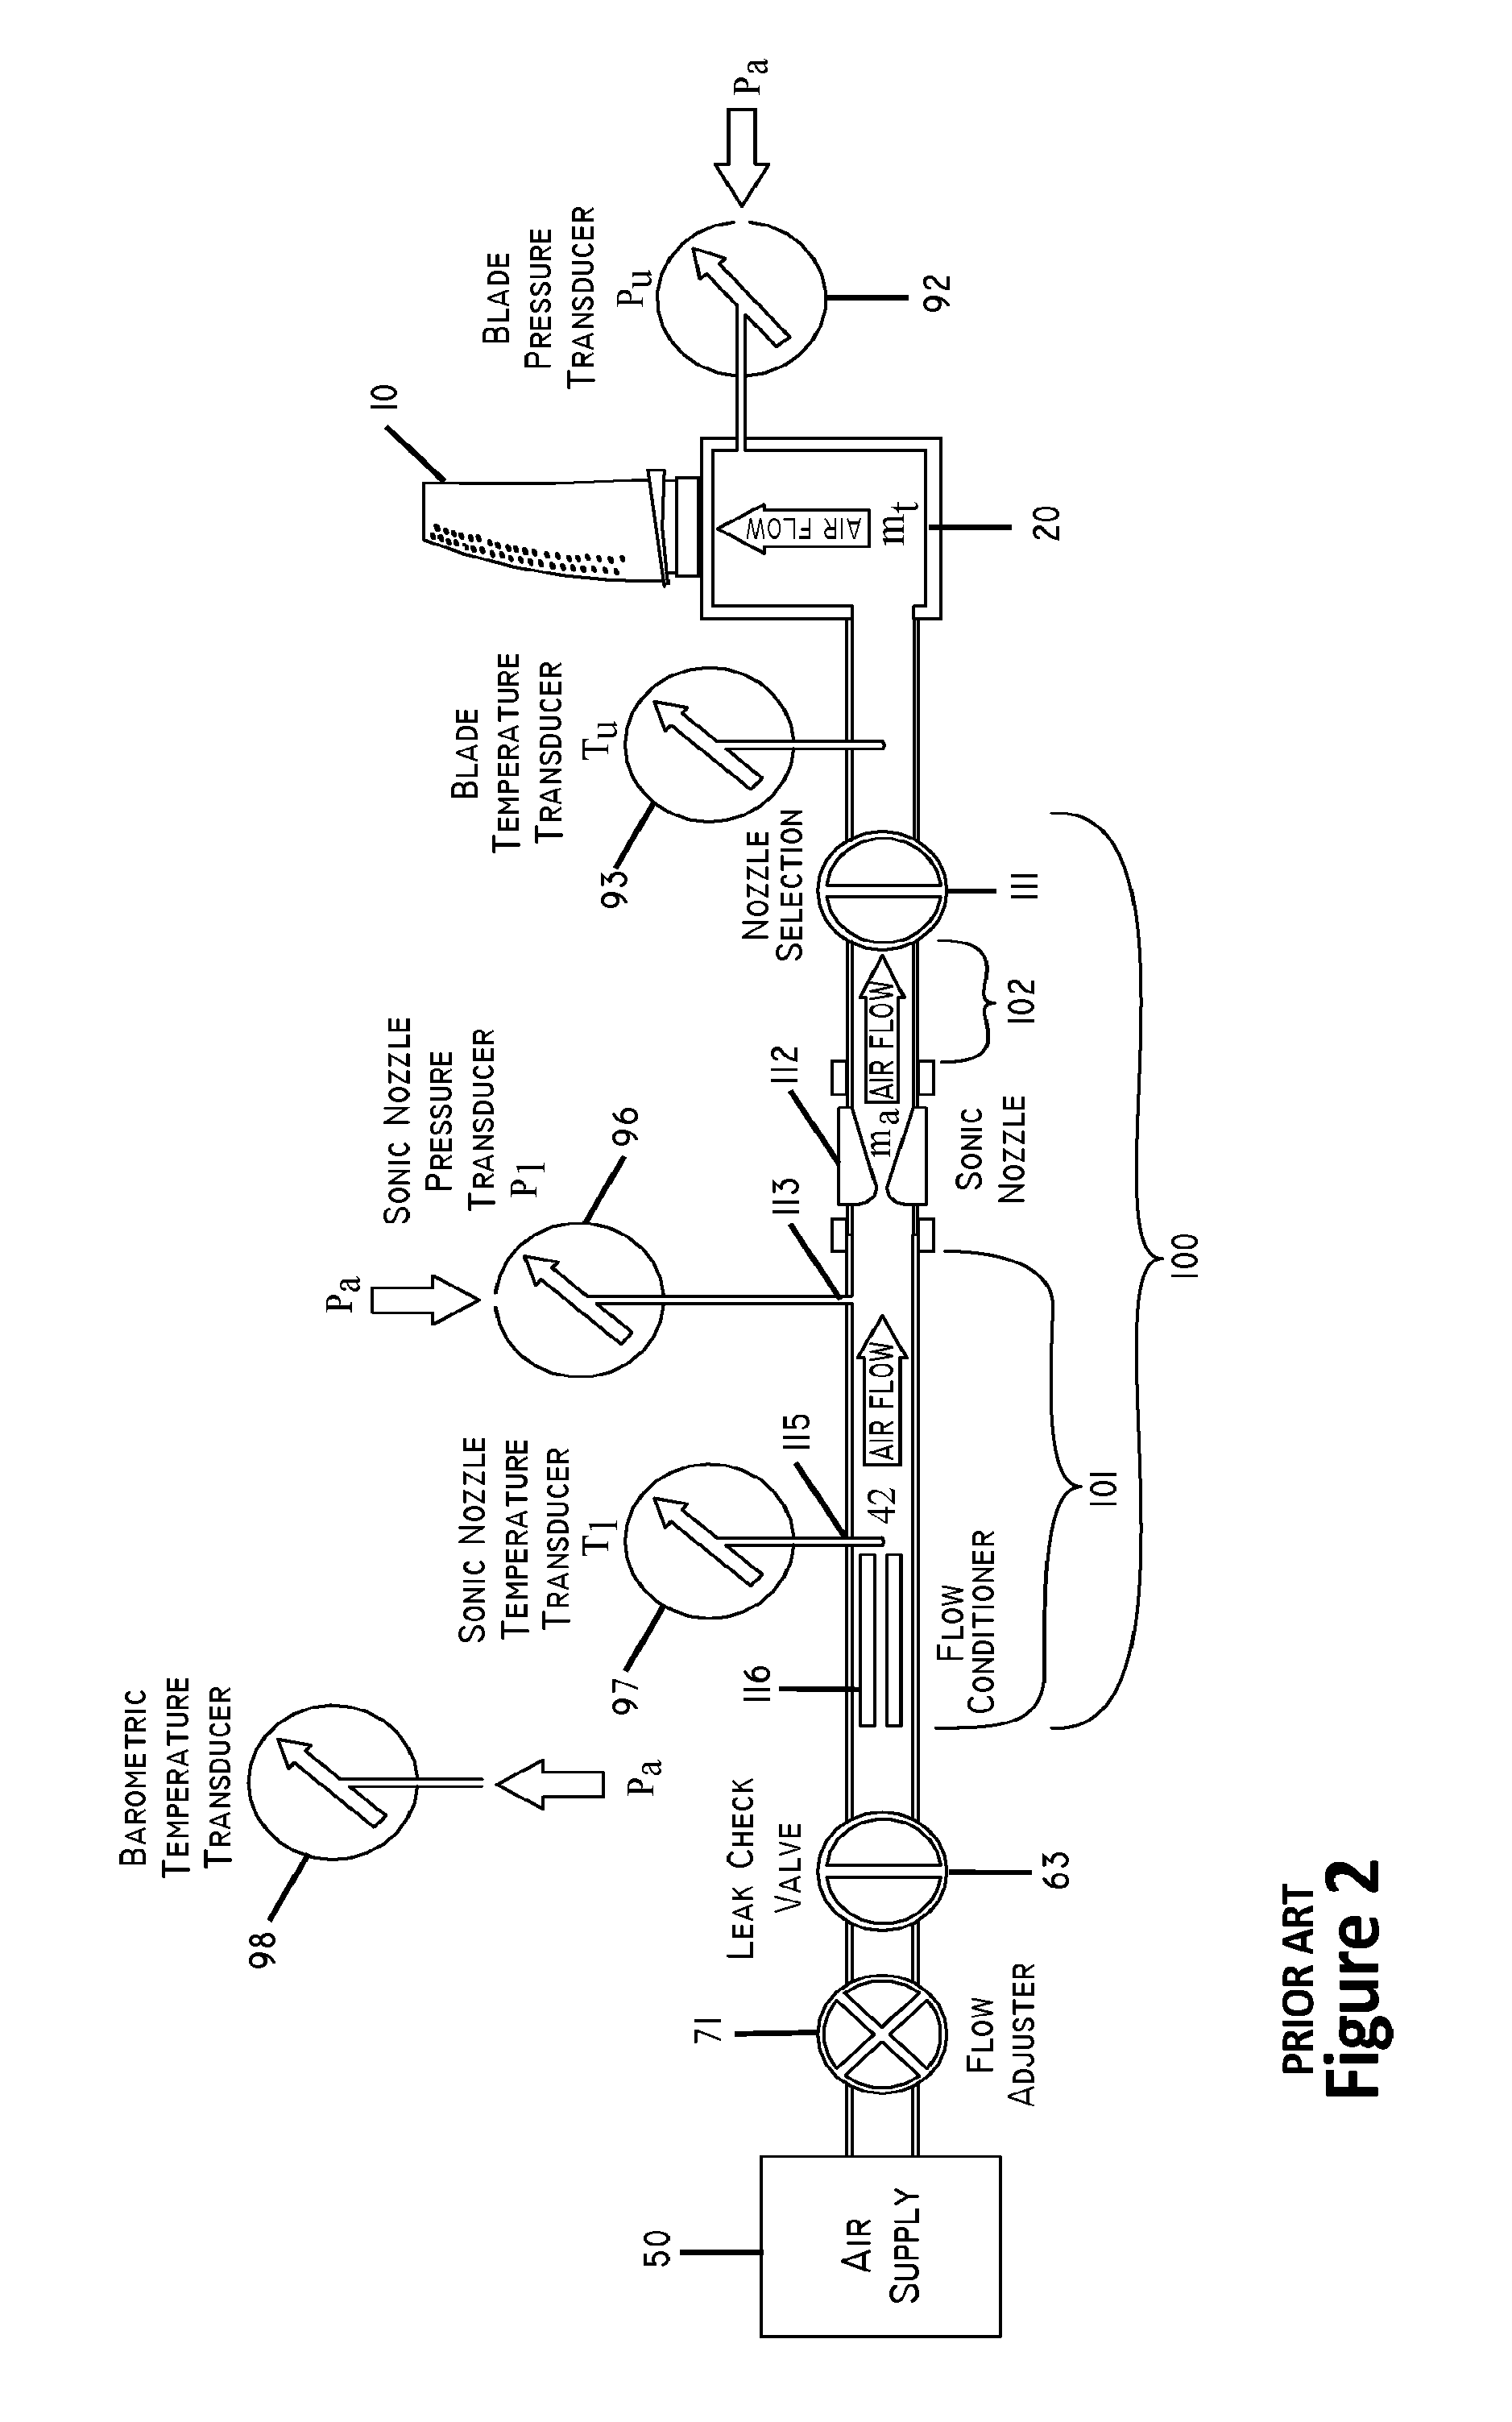 Apparatus and method for measurement of the film cooling effect produced by air cooled gas turbine components